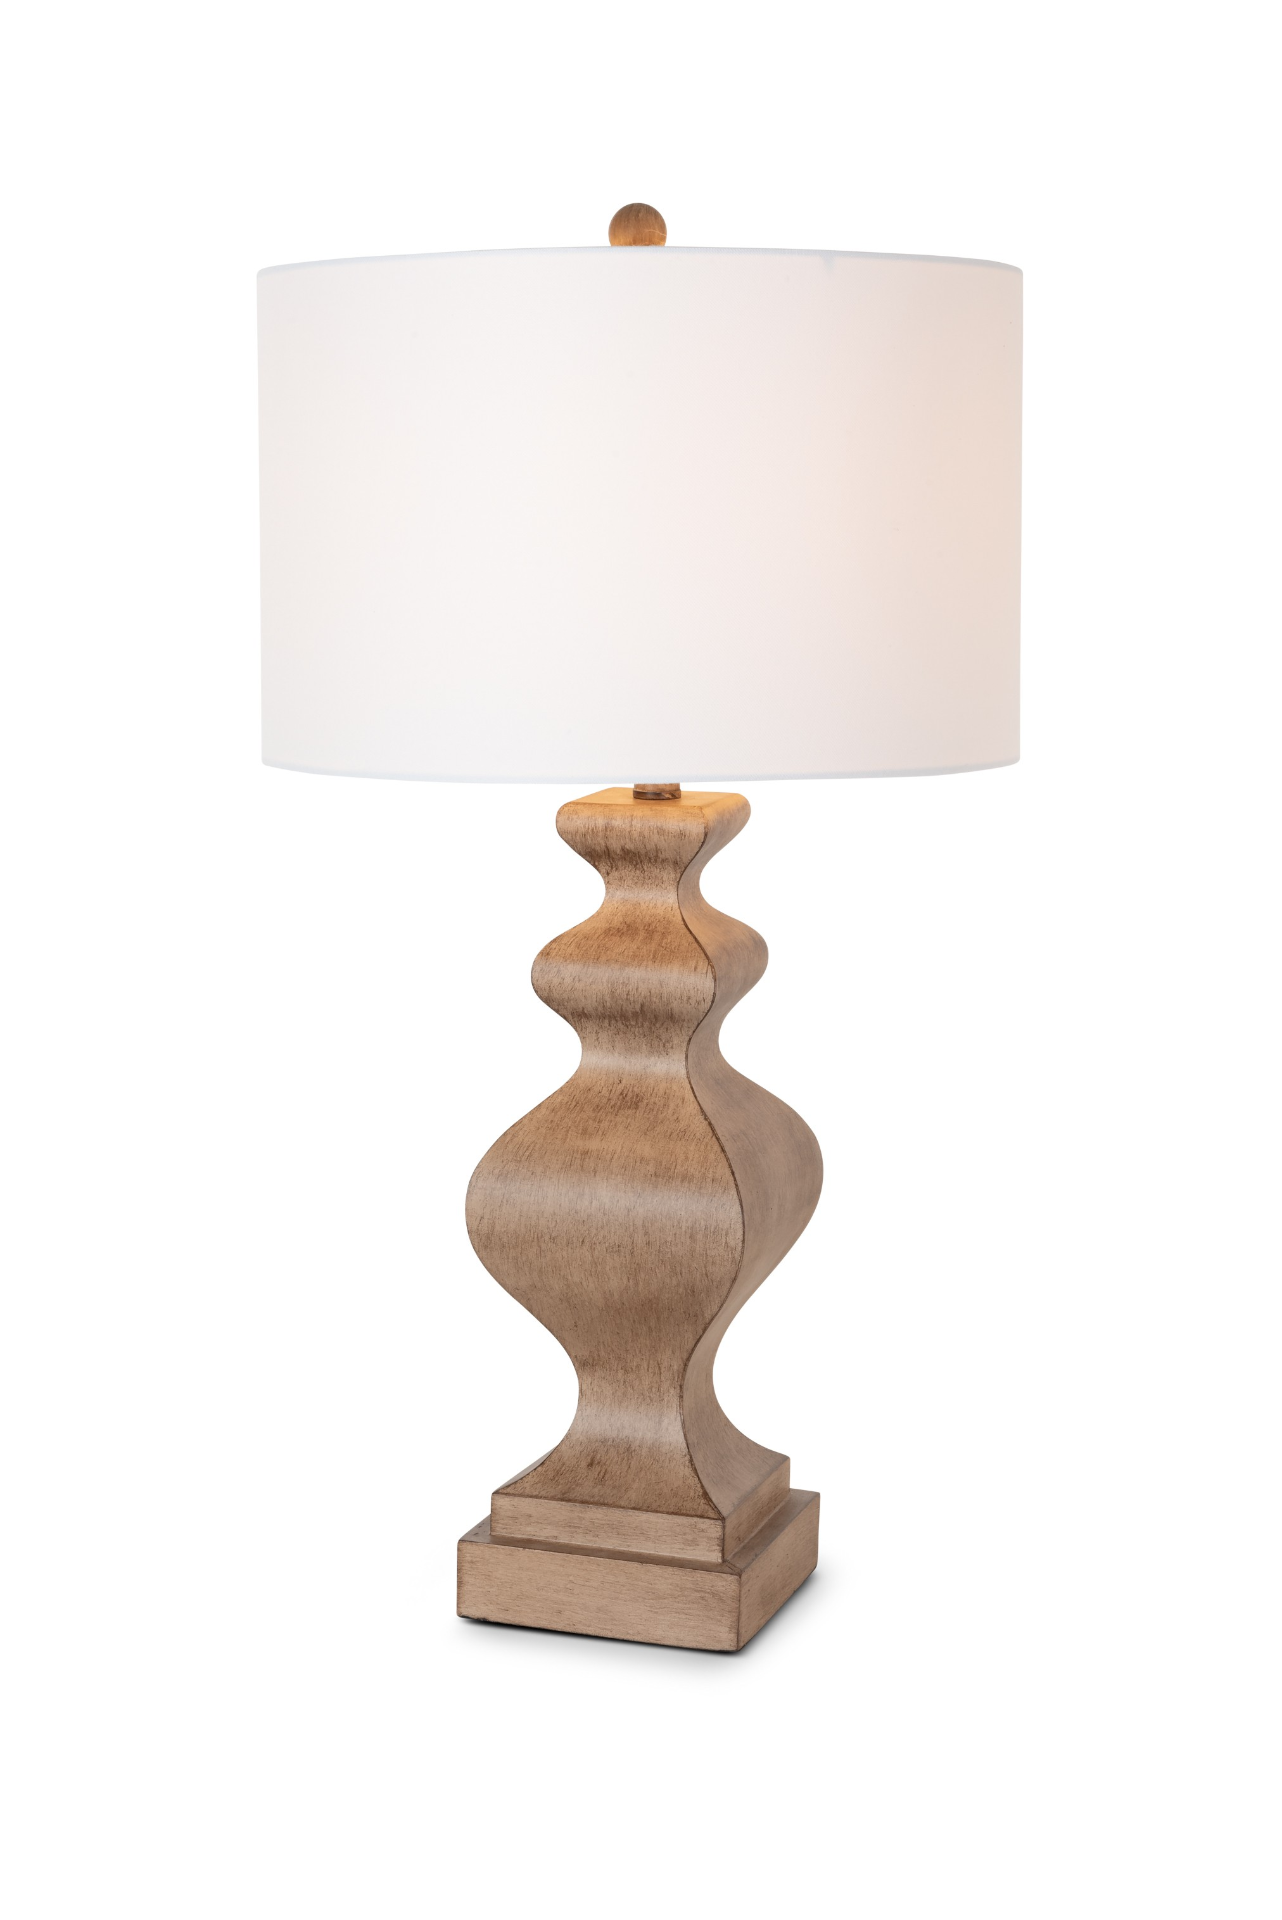 Chic Warm Brown Curvaceous Table Lamp Set (31"H)